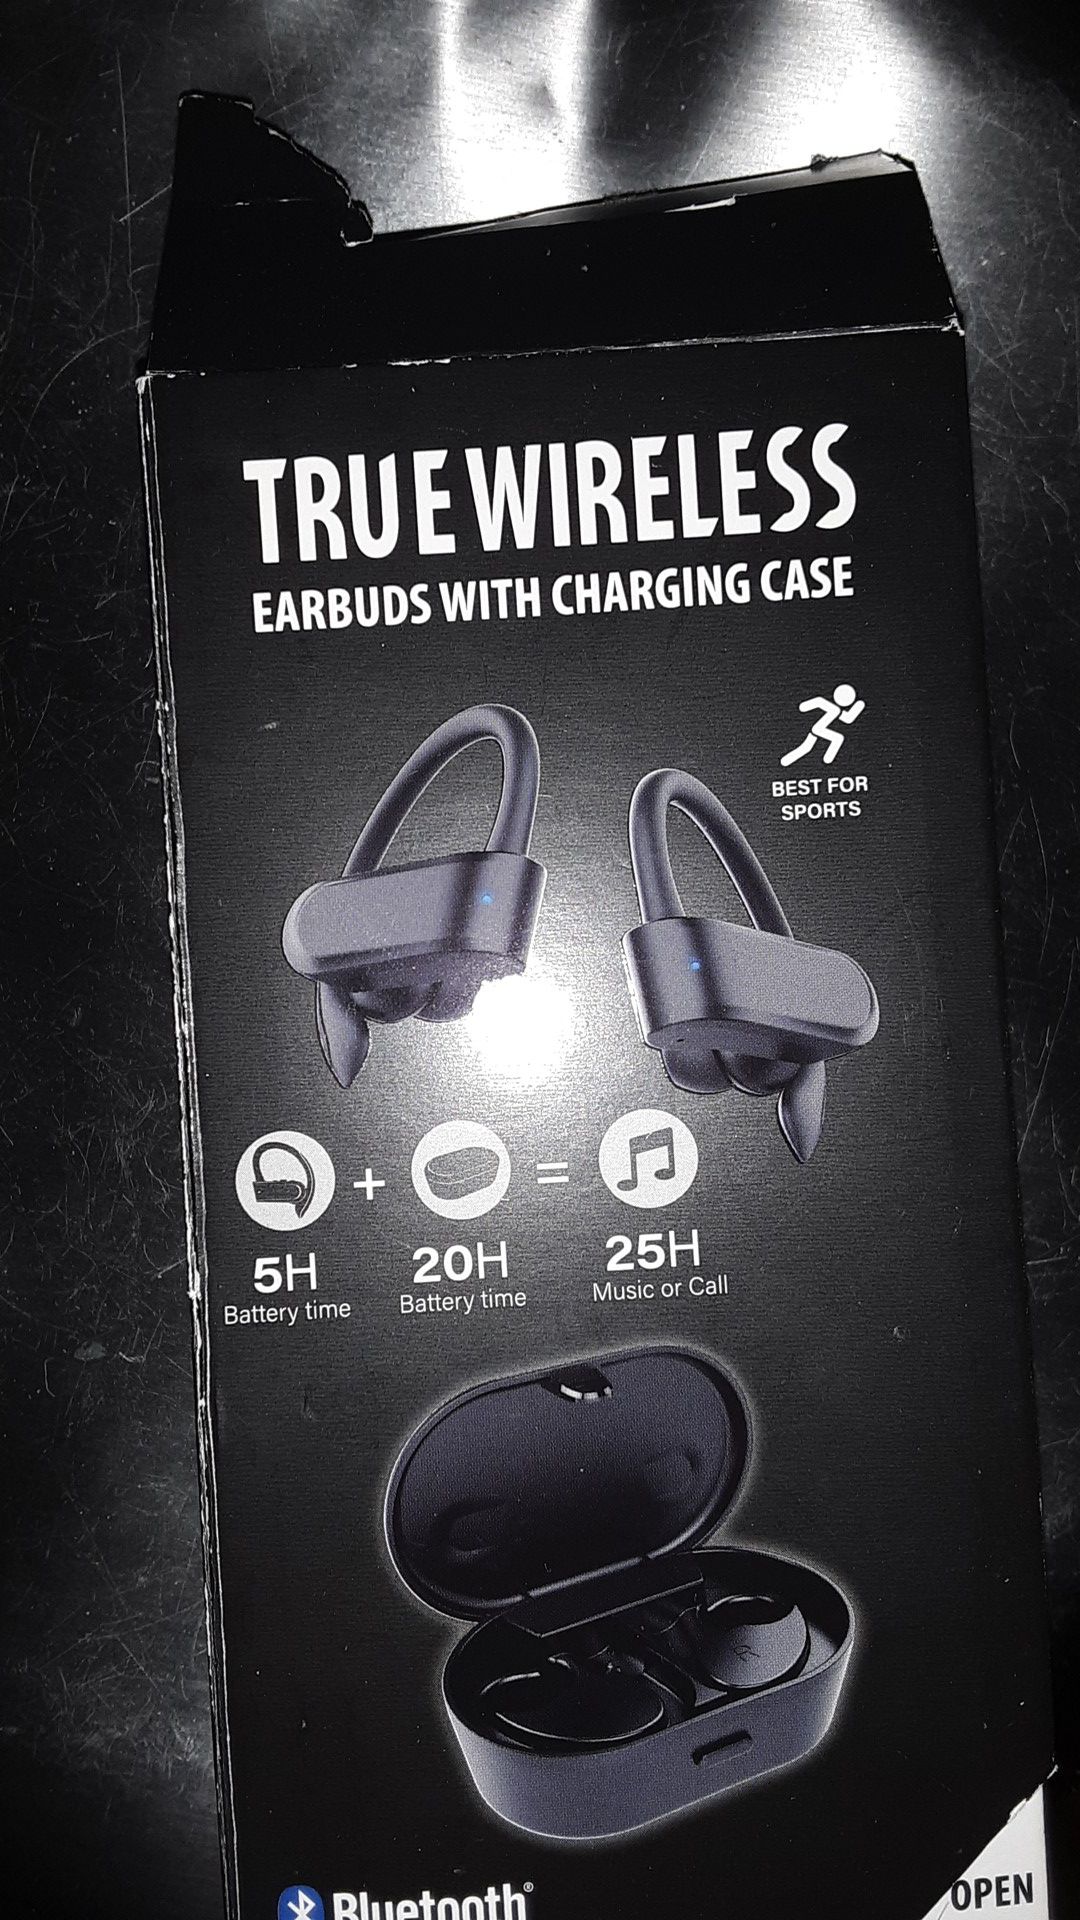 True wireless Earbuds with charging case